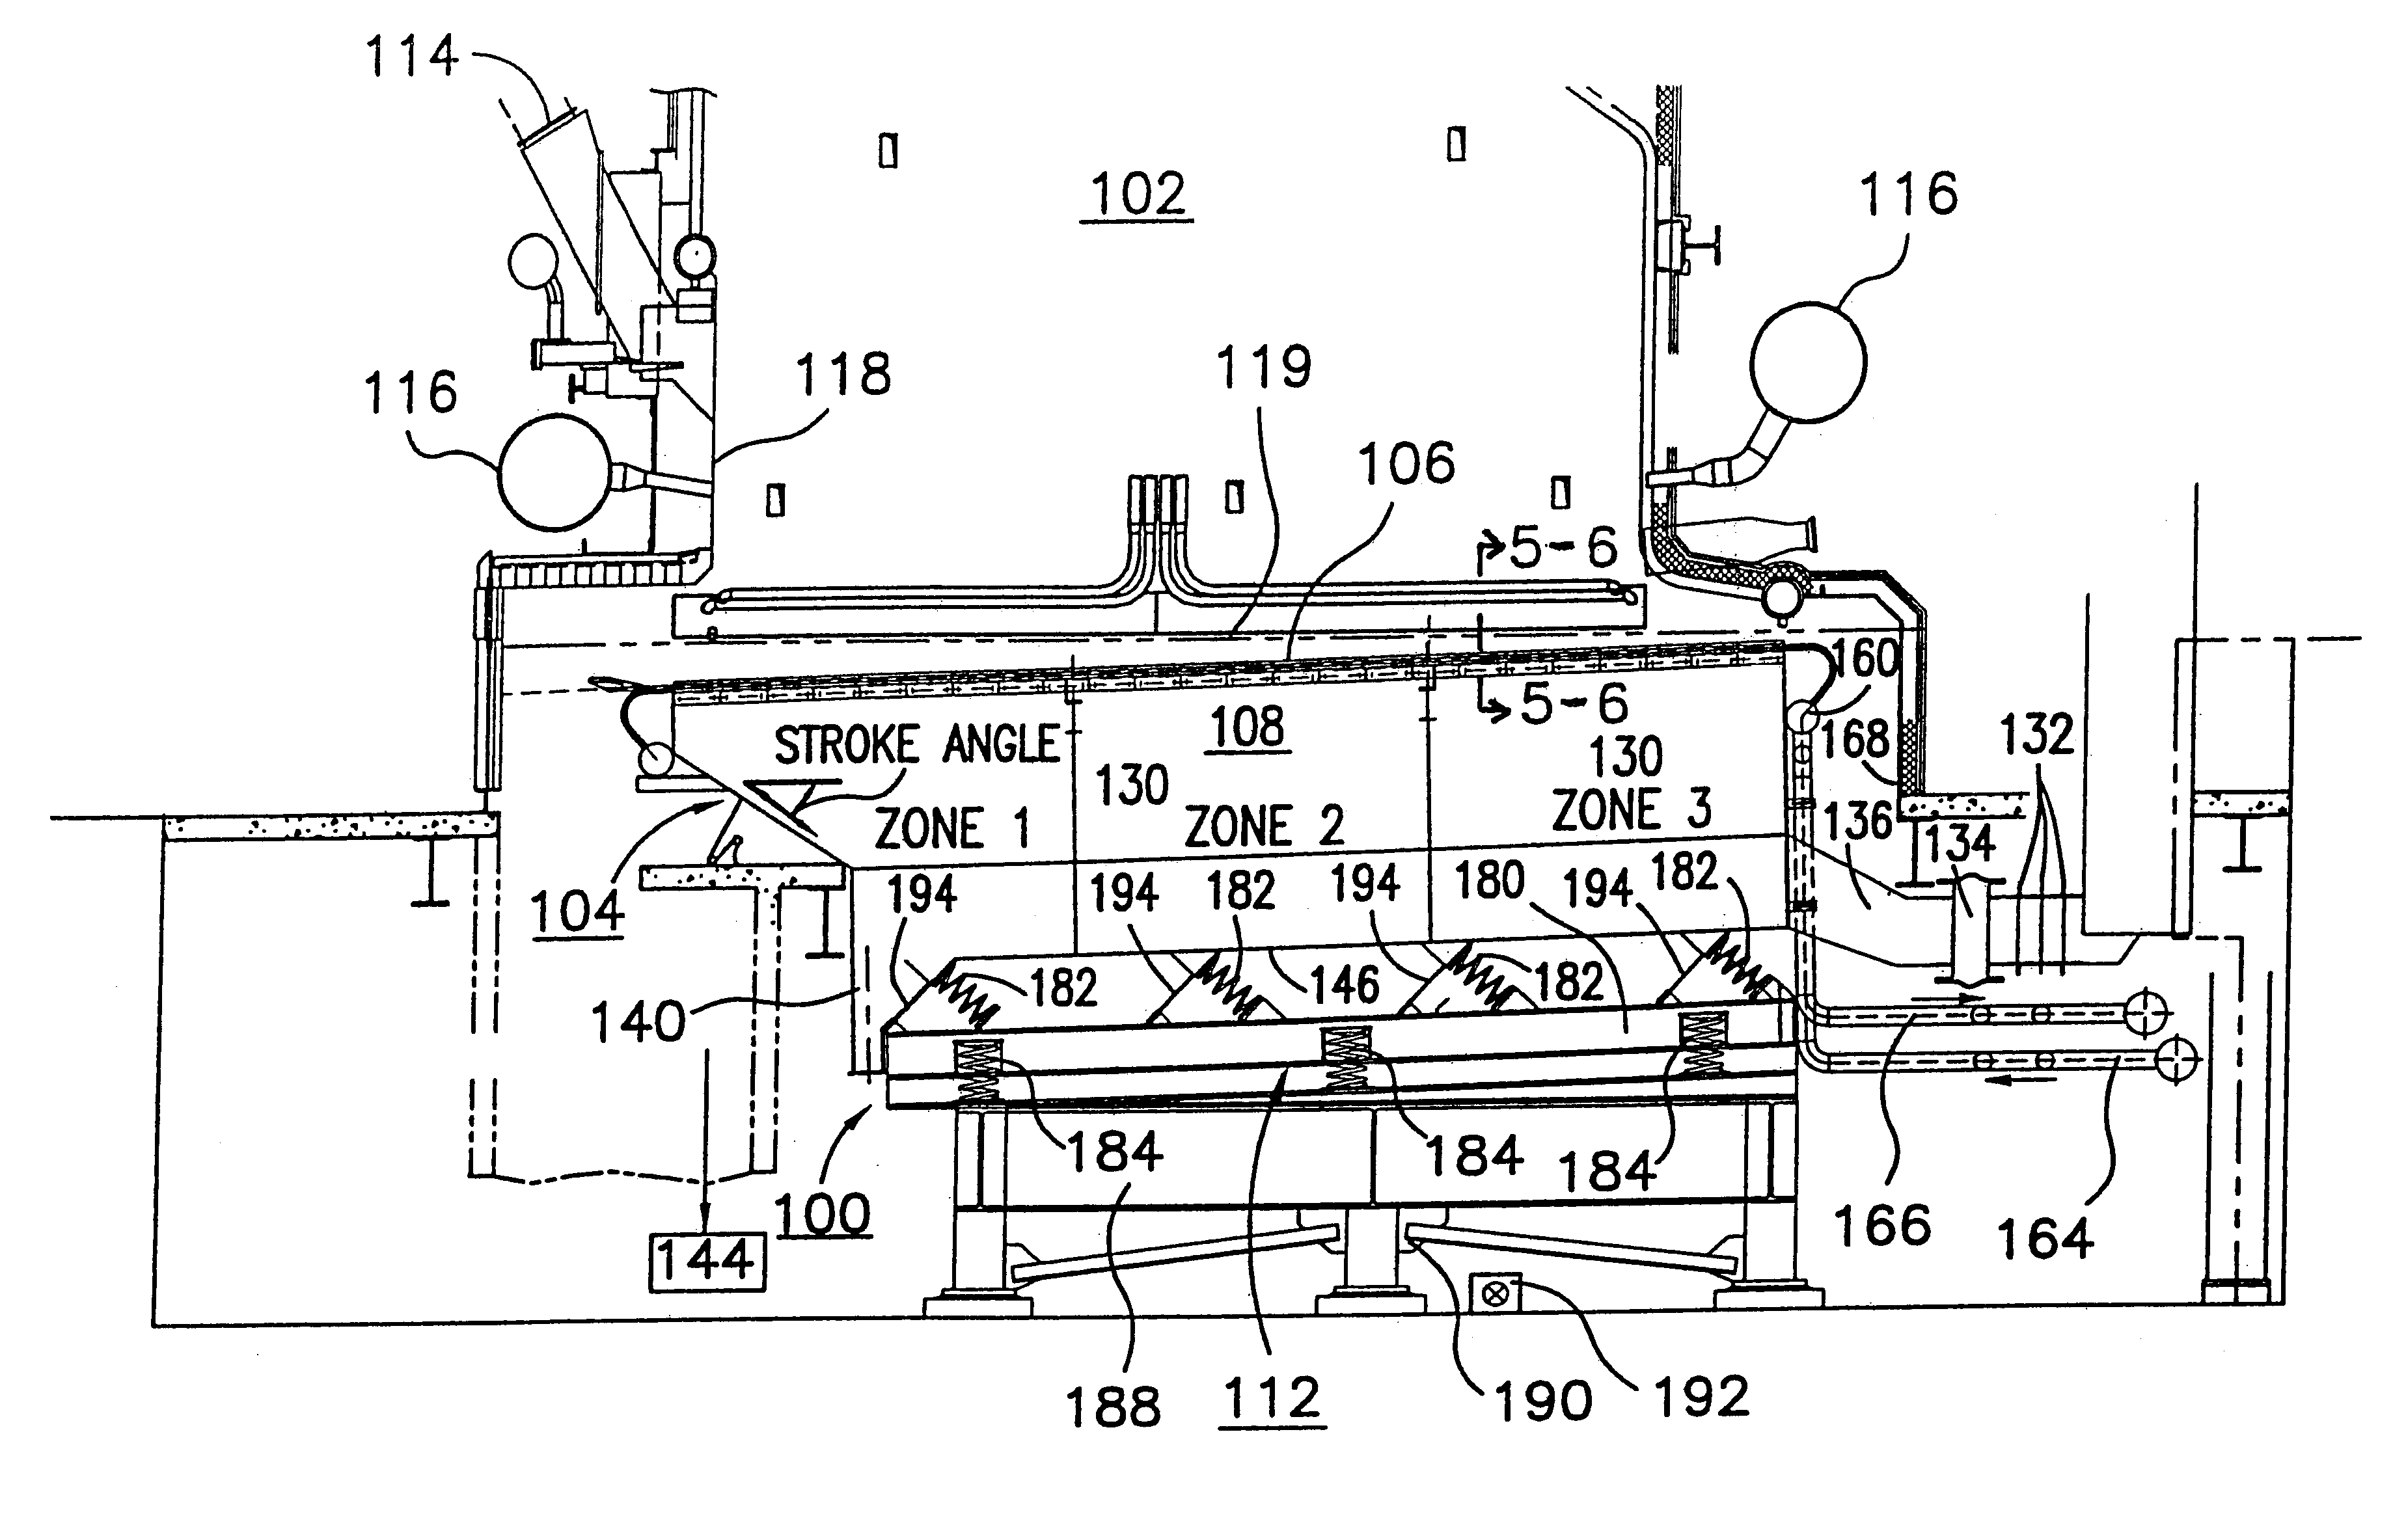 Water-cooled oscillating grate system